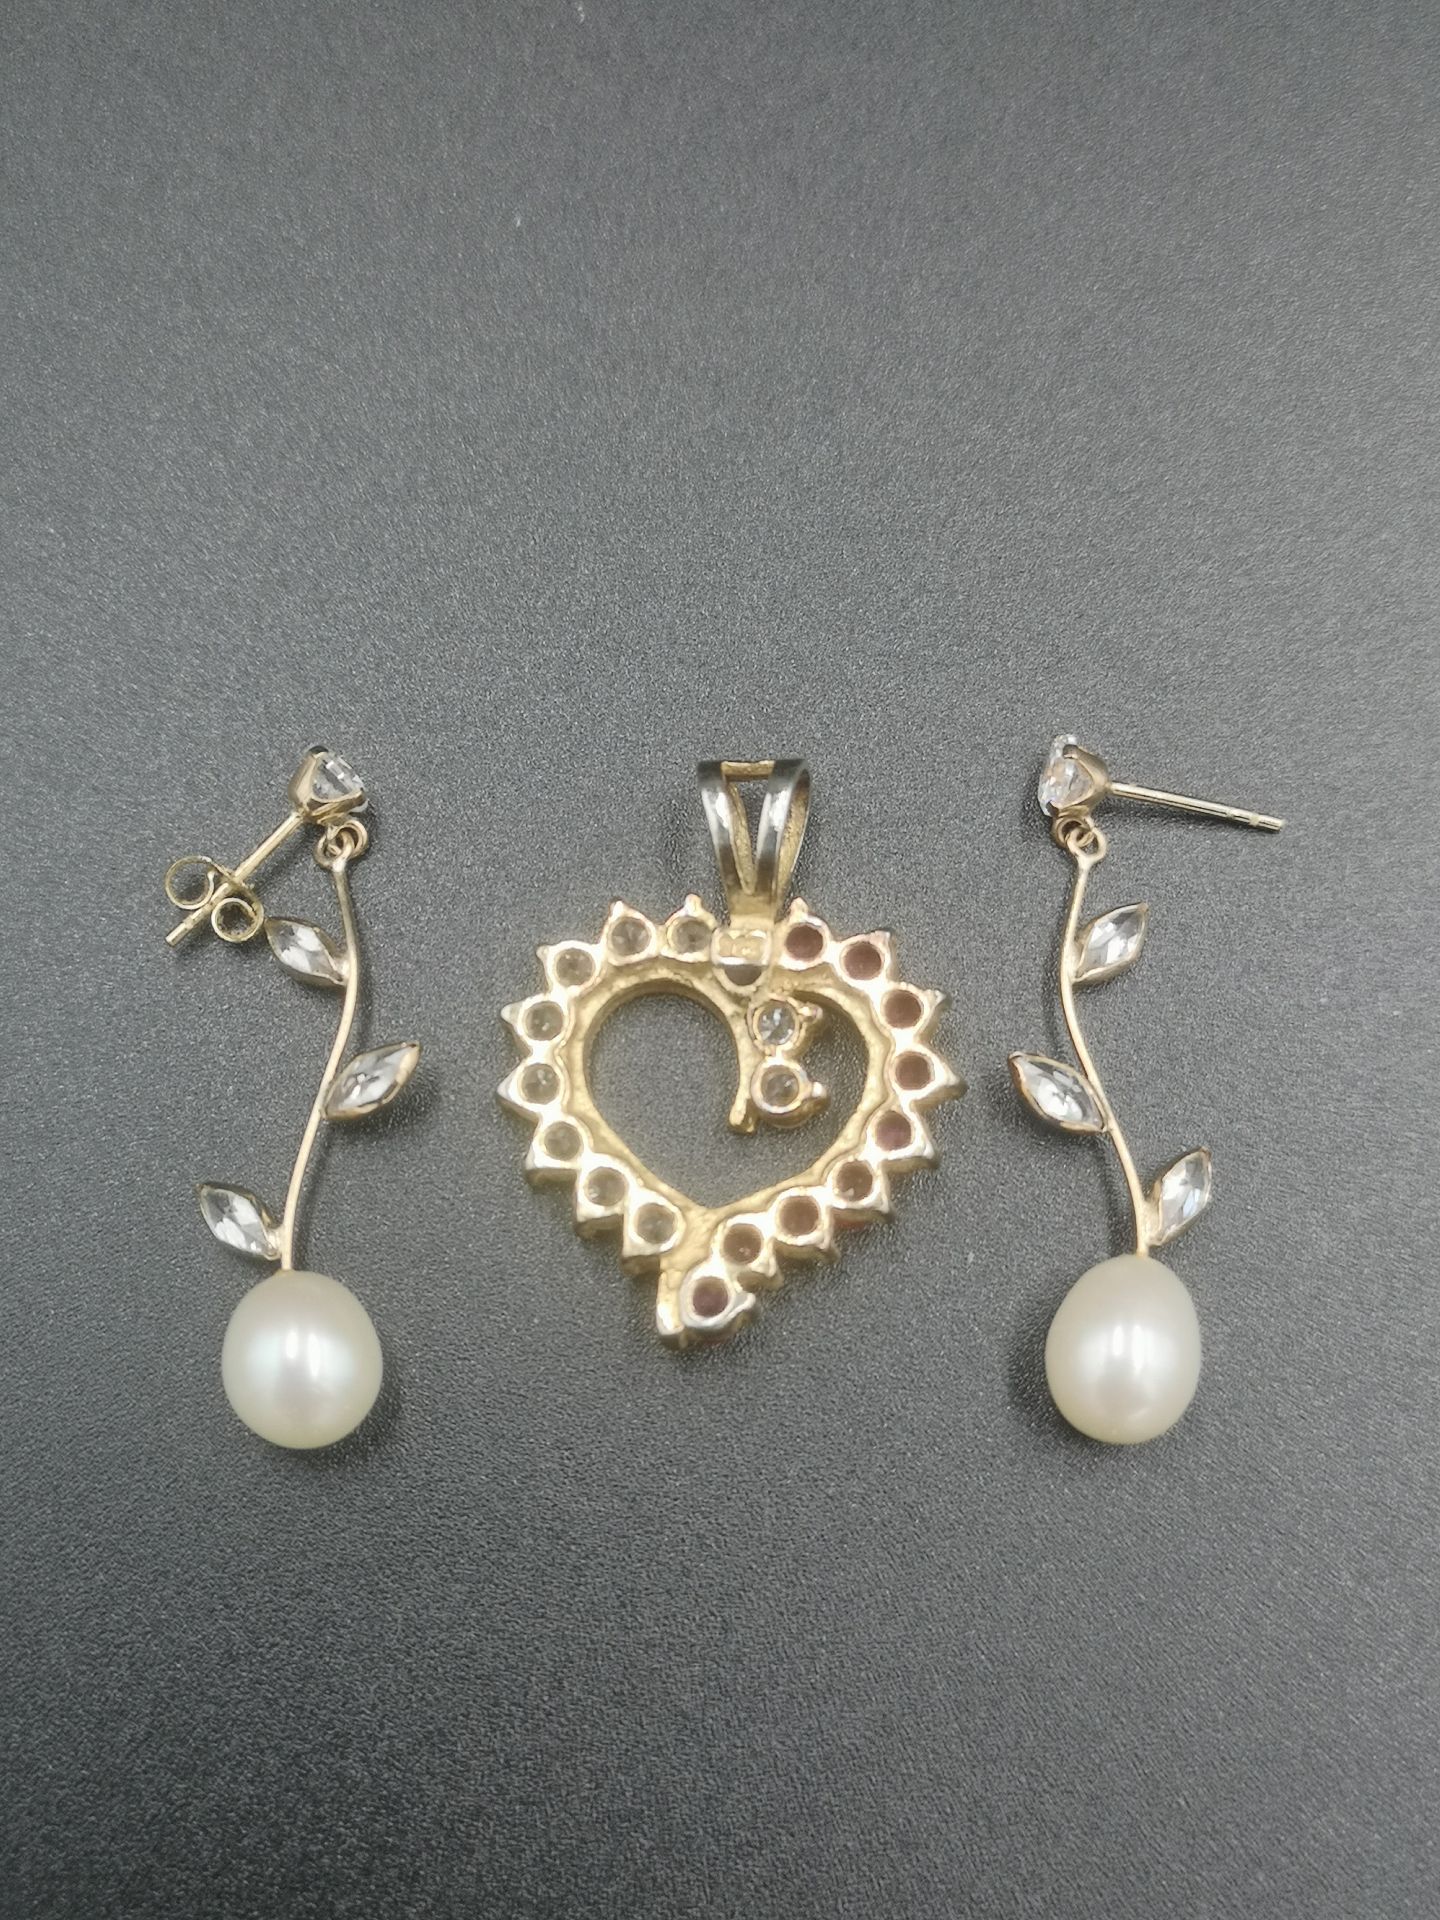 Pair of 9ct gold earrings together with a silver pendant - Image 3 of 4